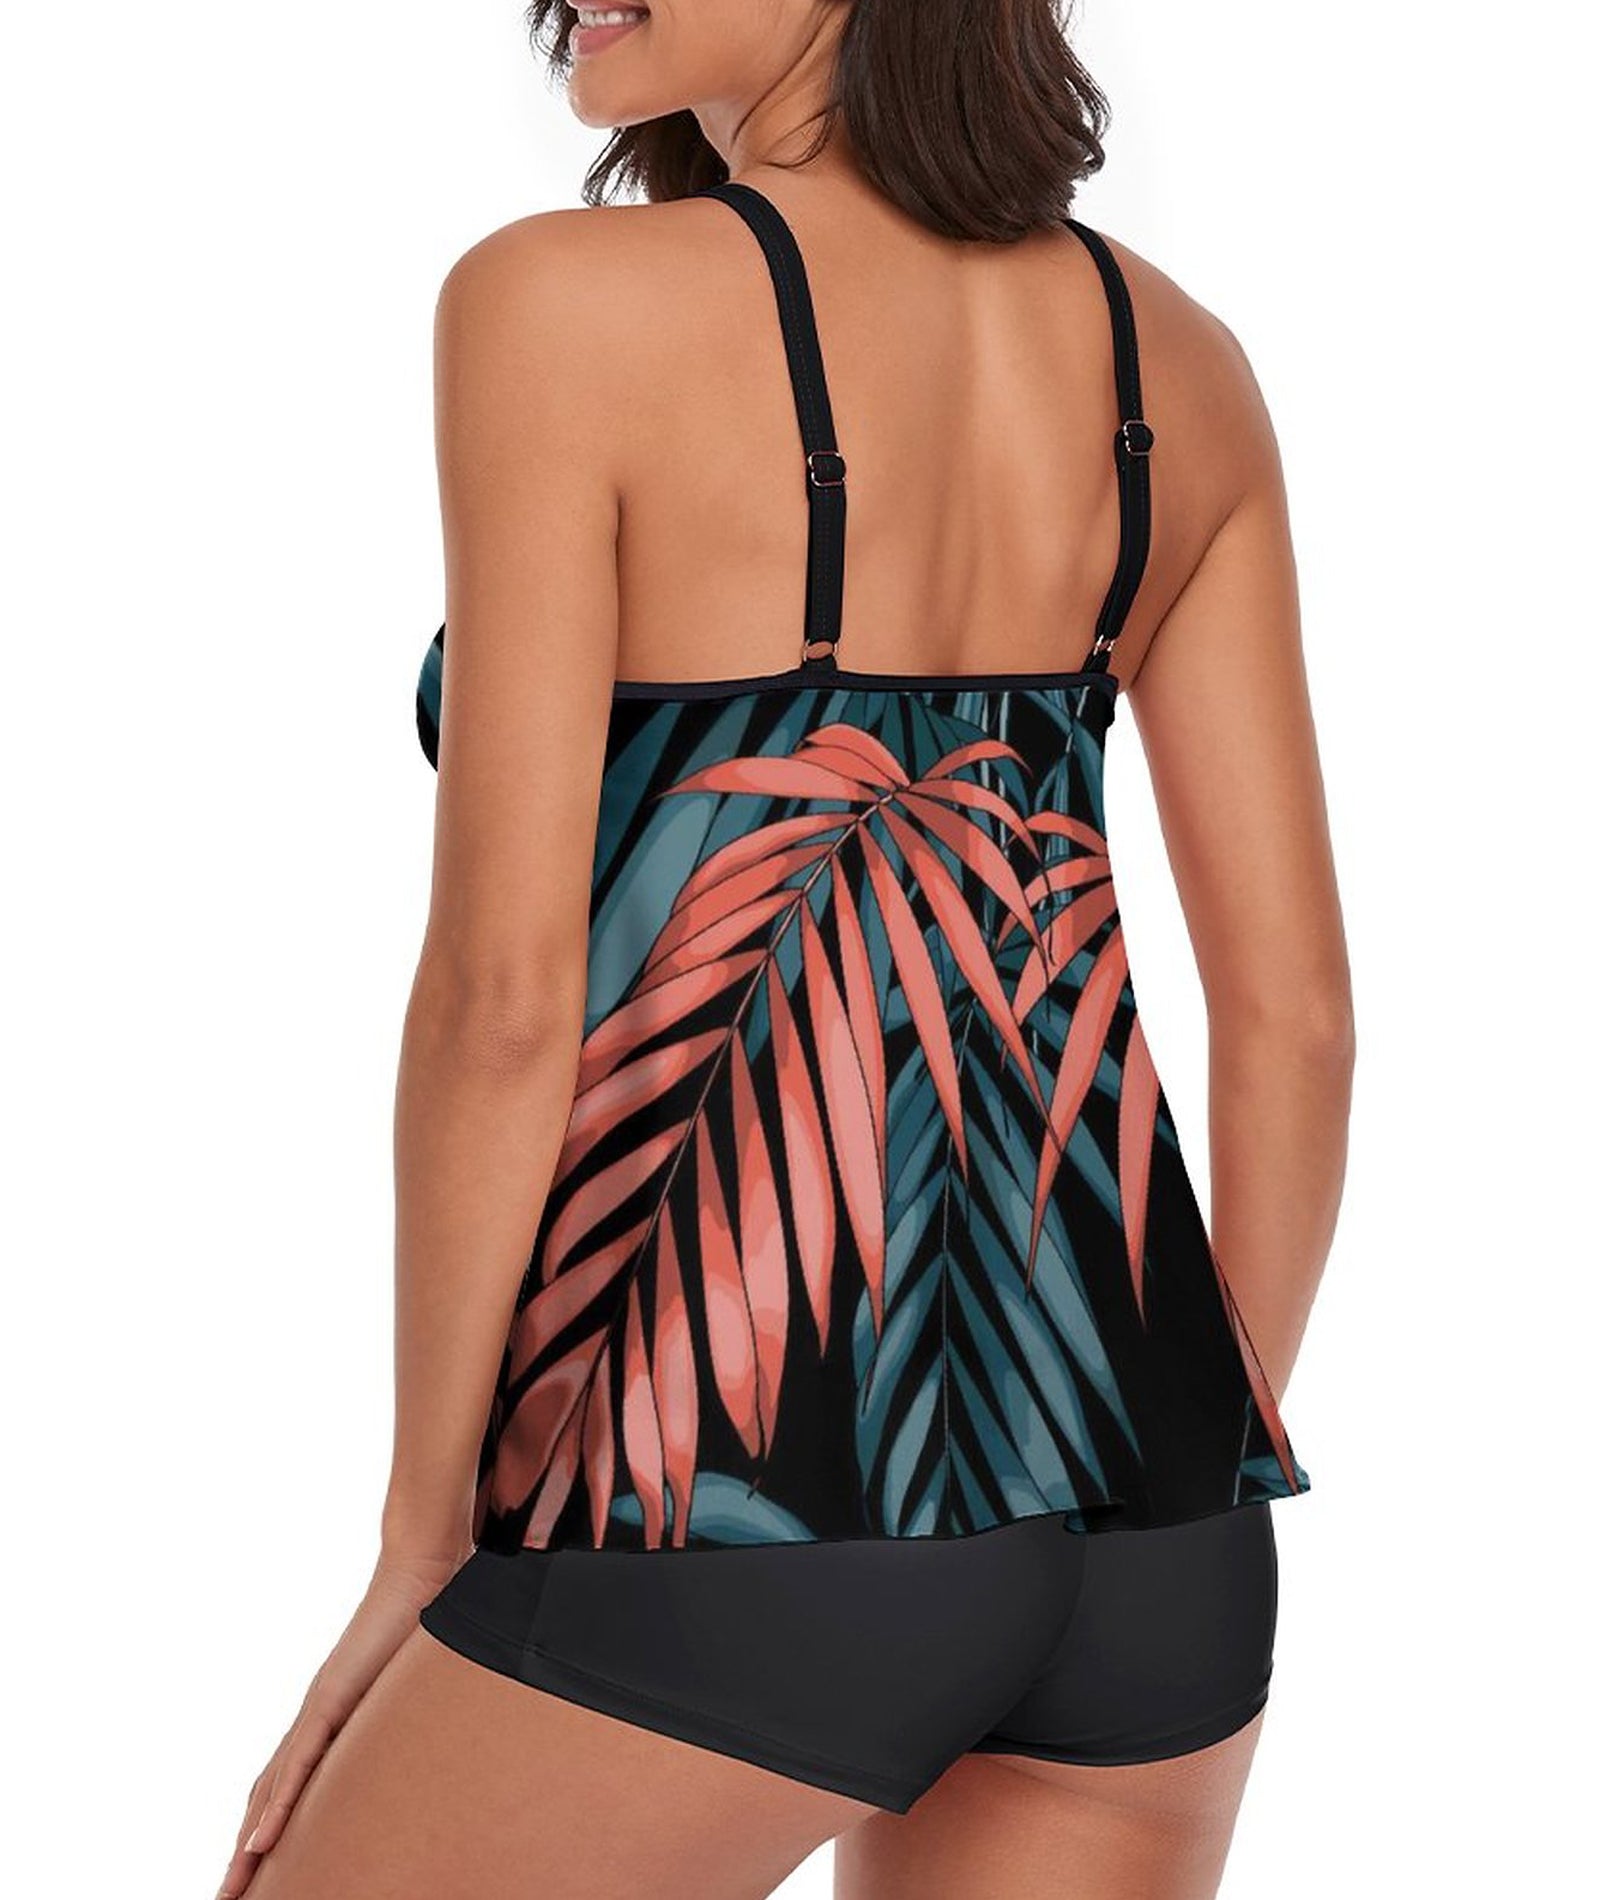 Tankini Print Leaf Tank Top Two Piece Bathing Suits with Boyshorts